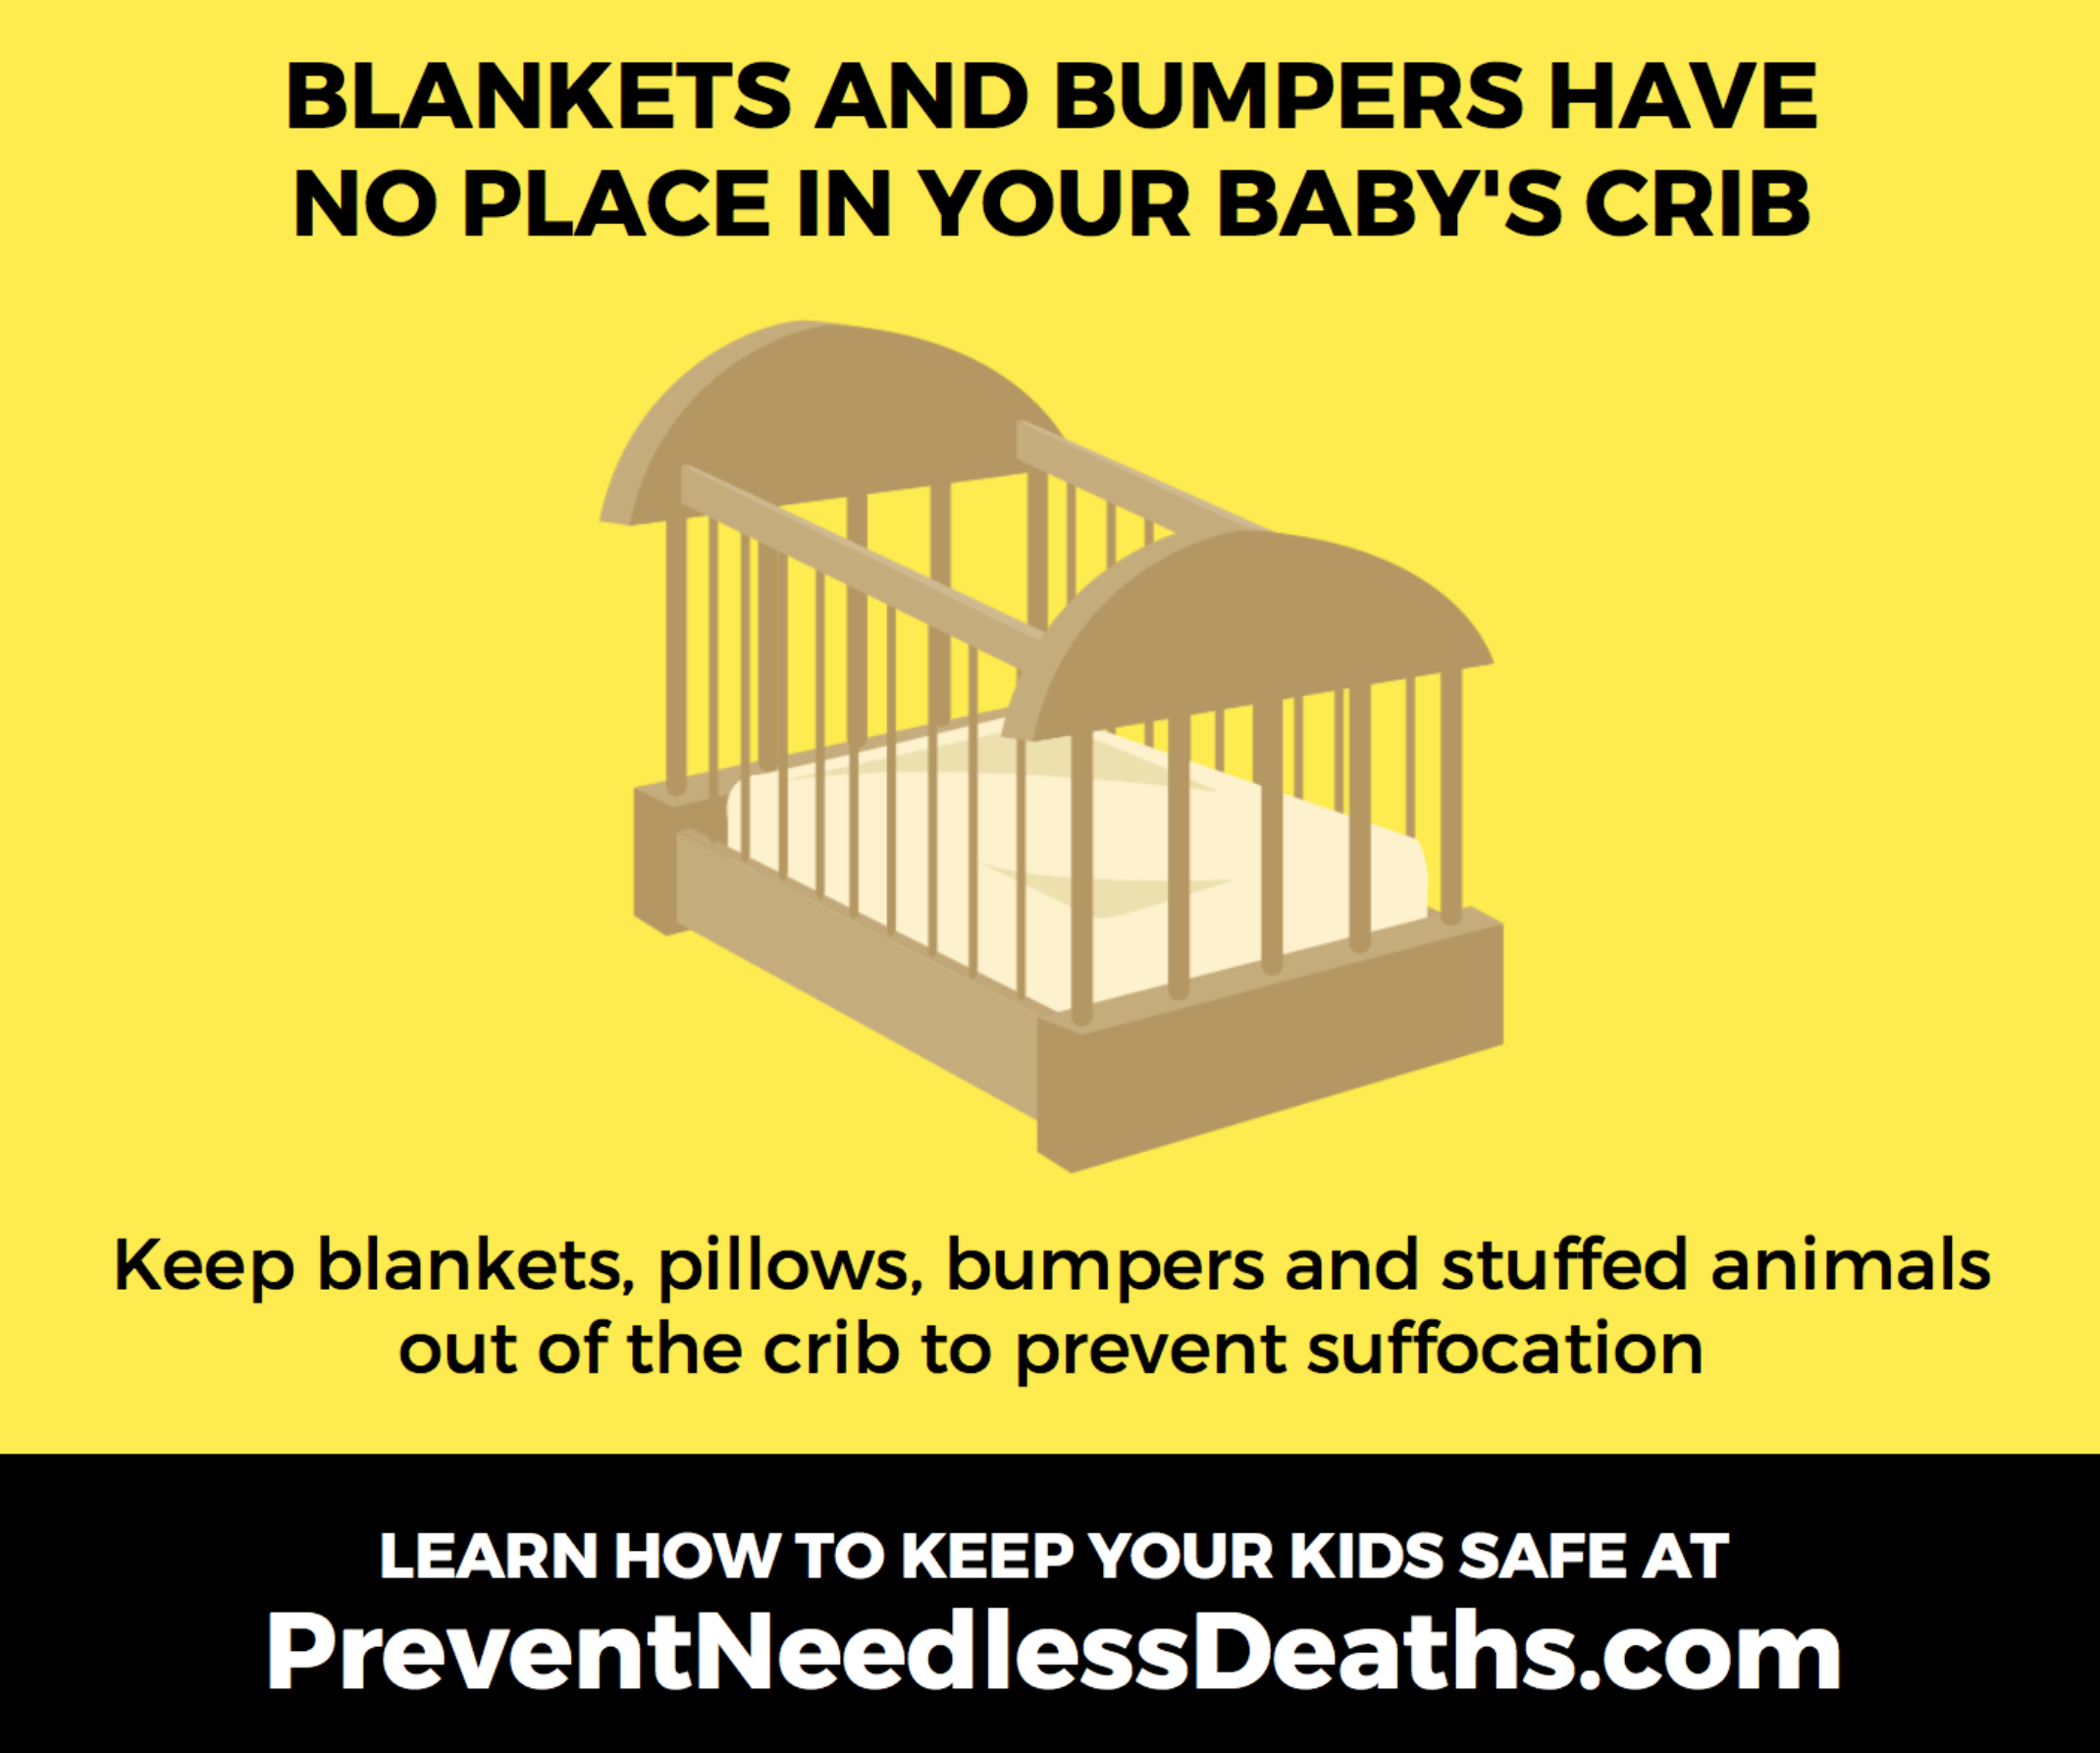 blankets and bumpers have no place in crib